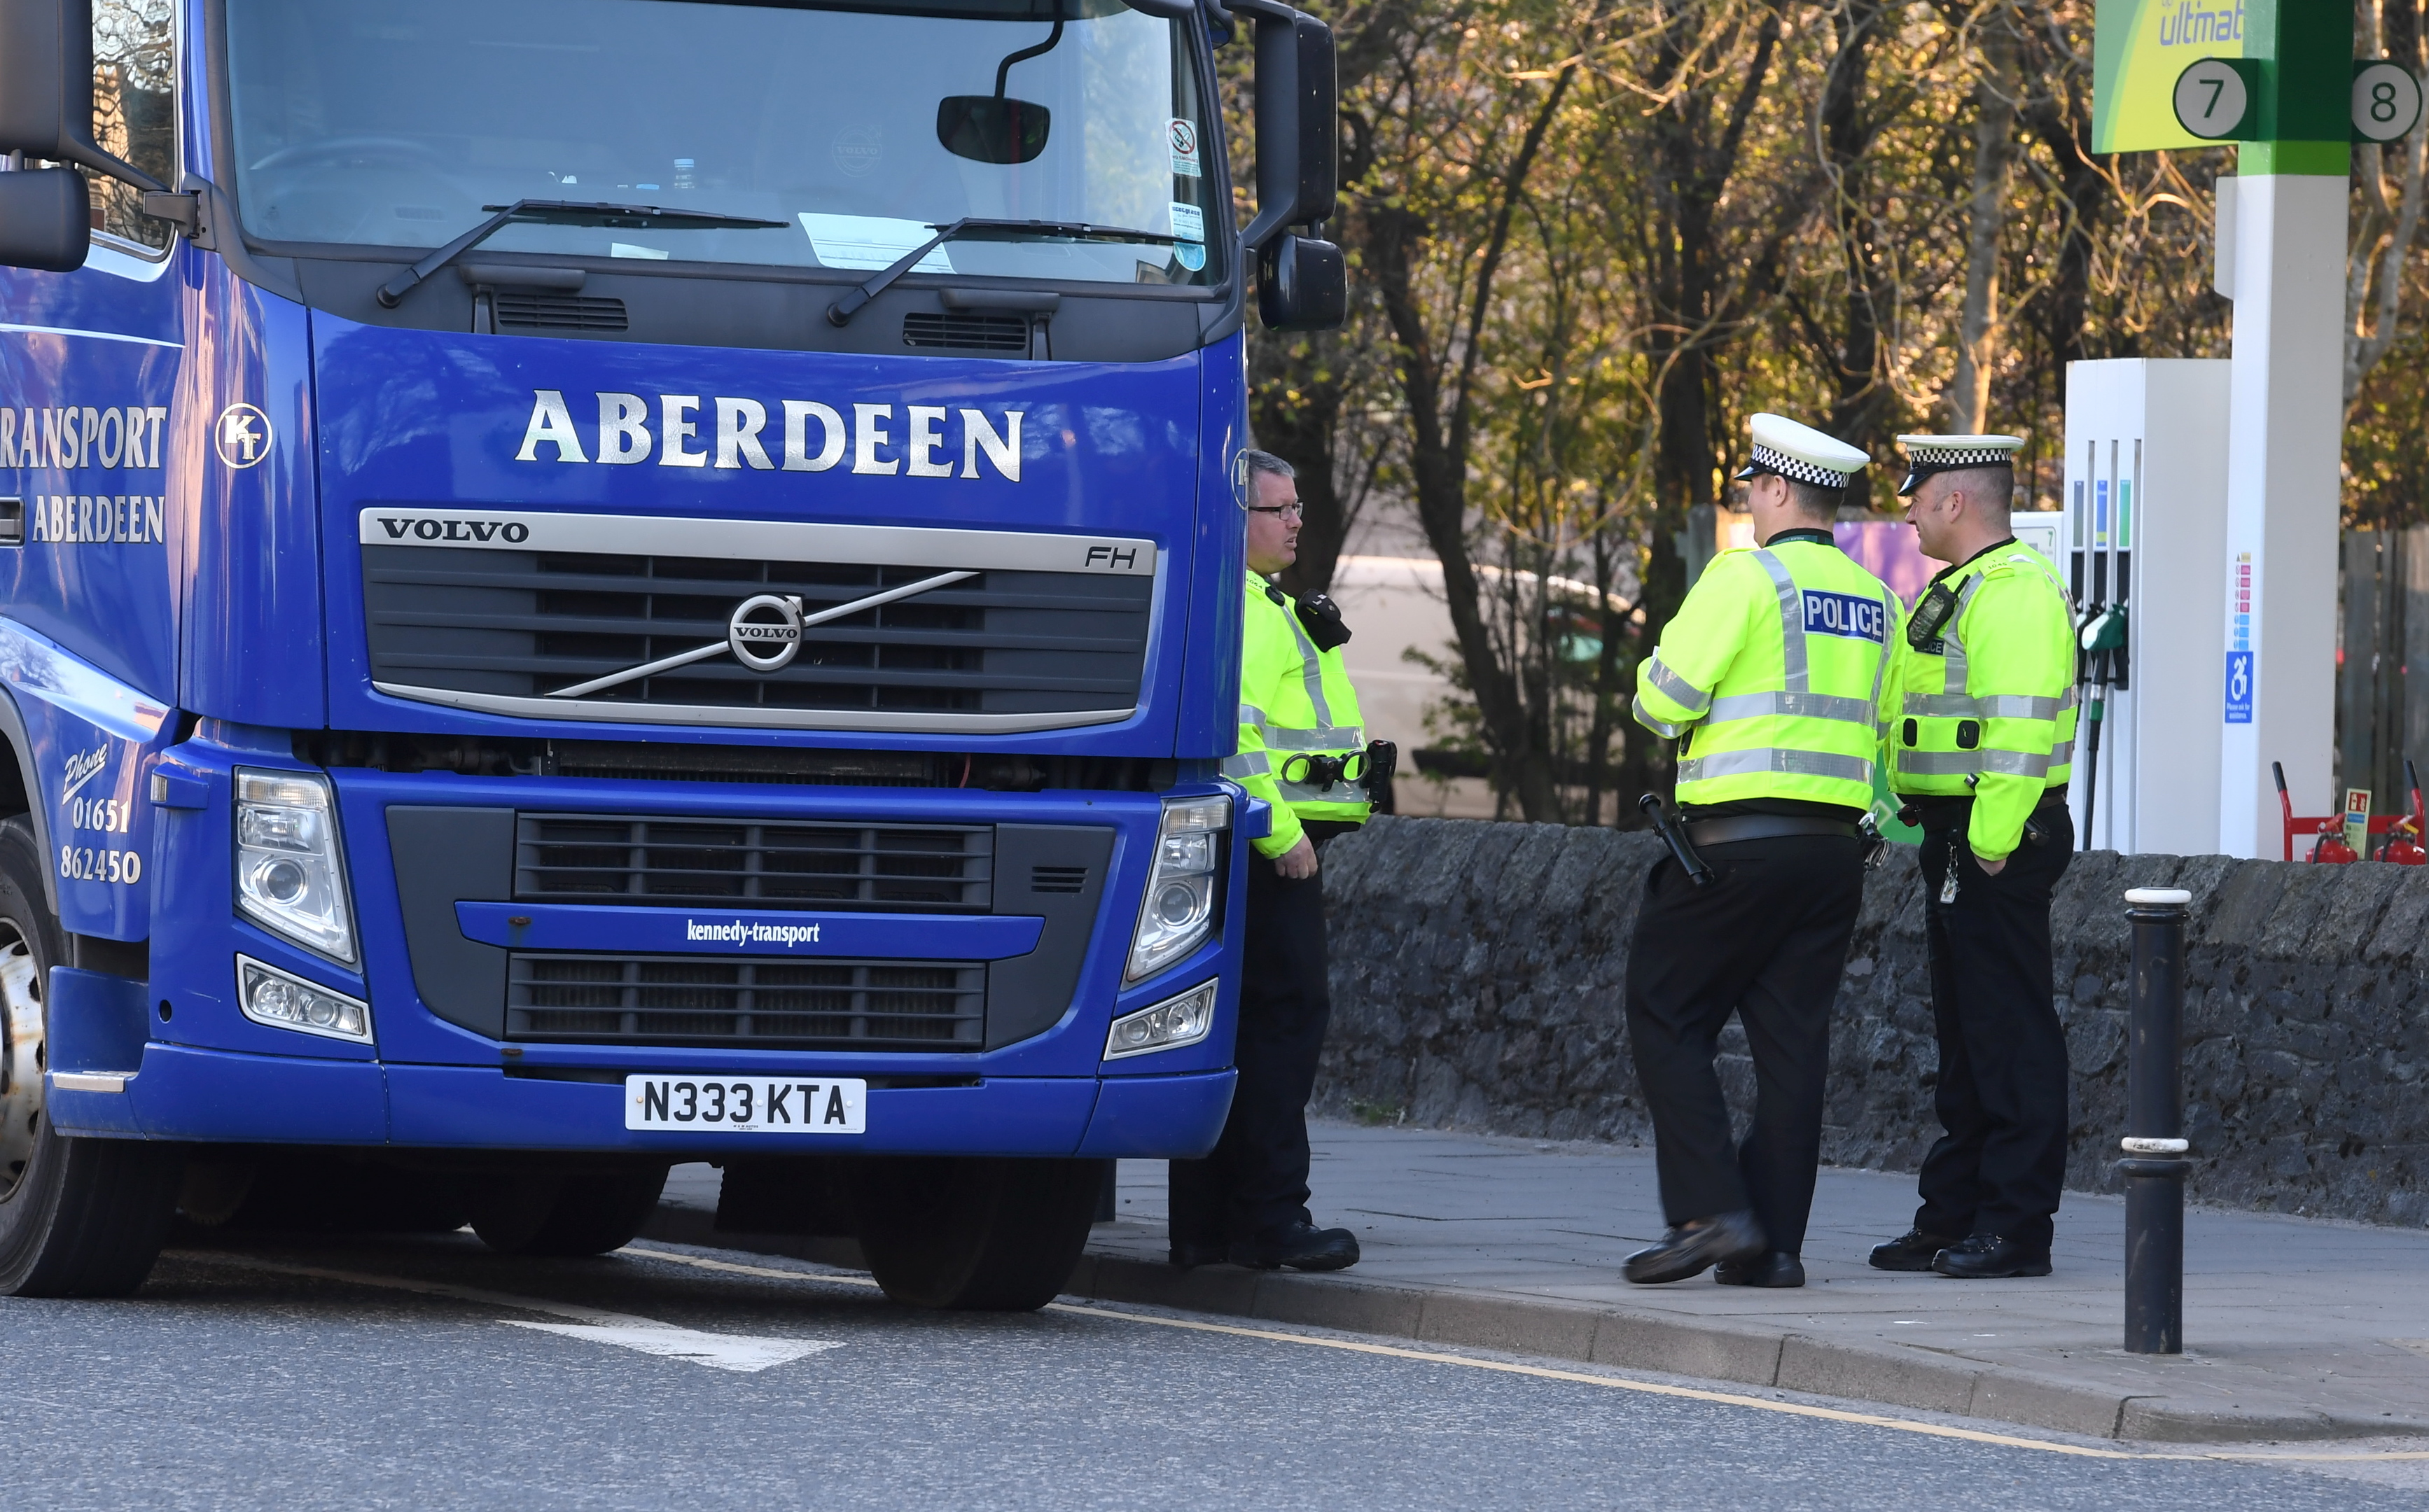 The lorry involved was stopped on King Stret, near Aberdeen University